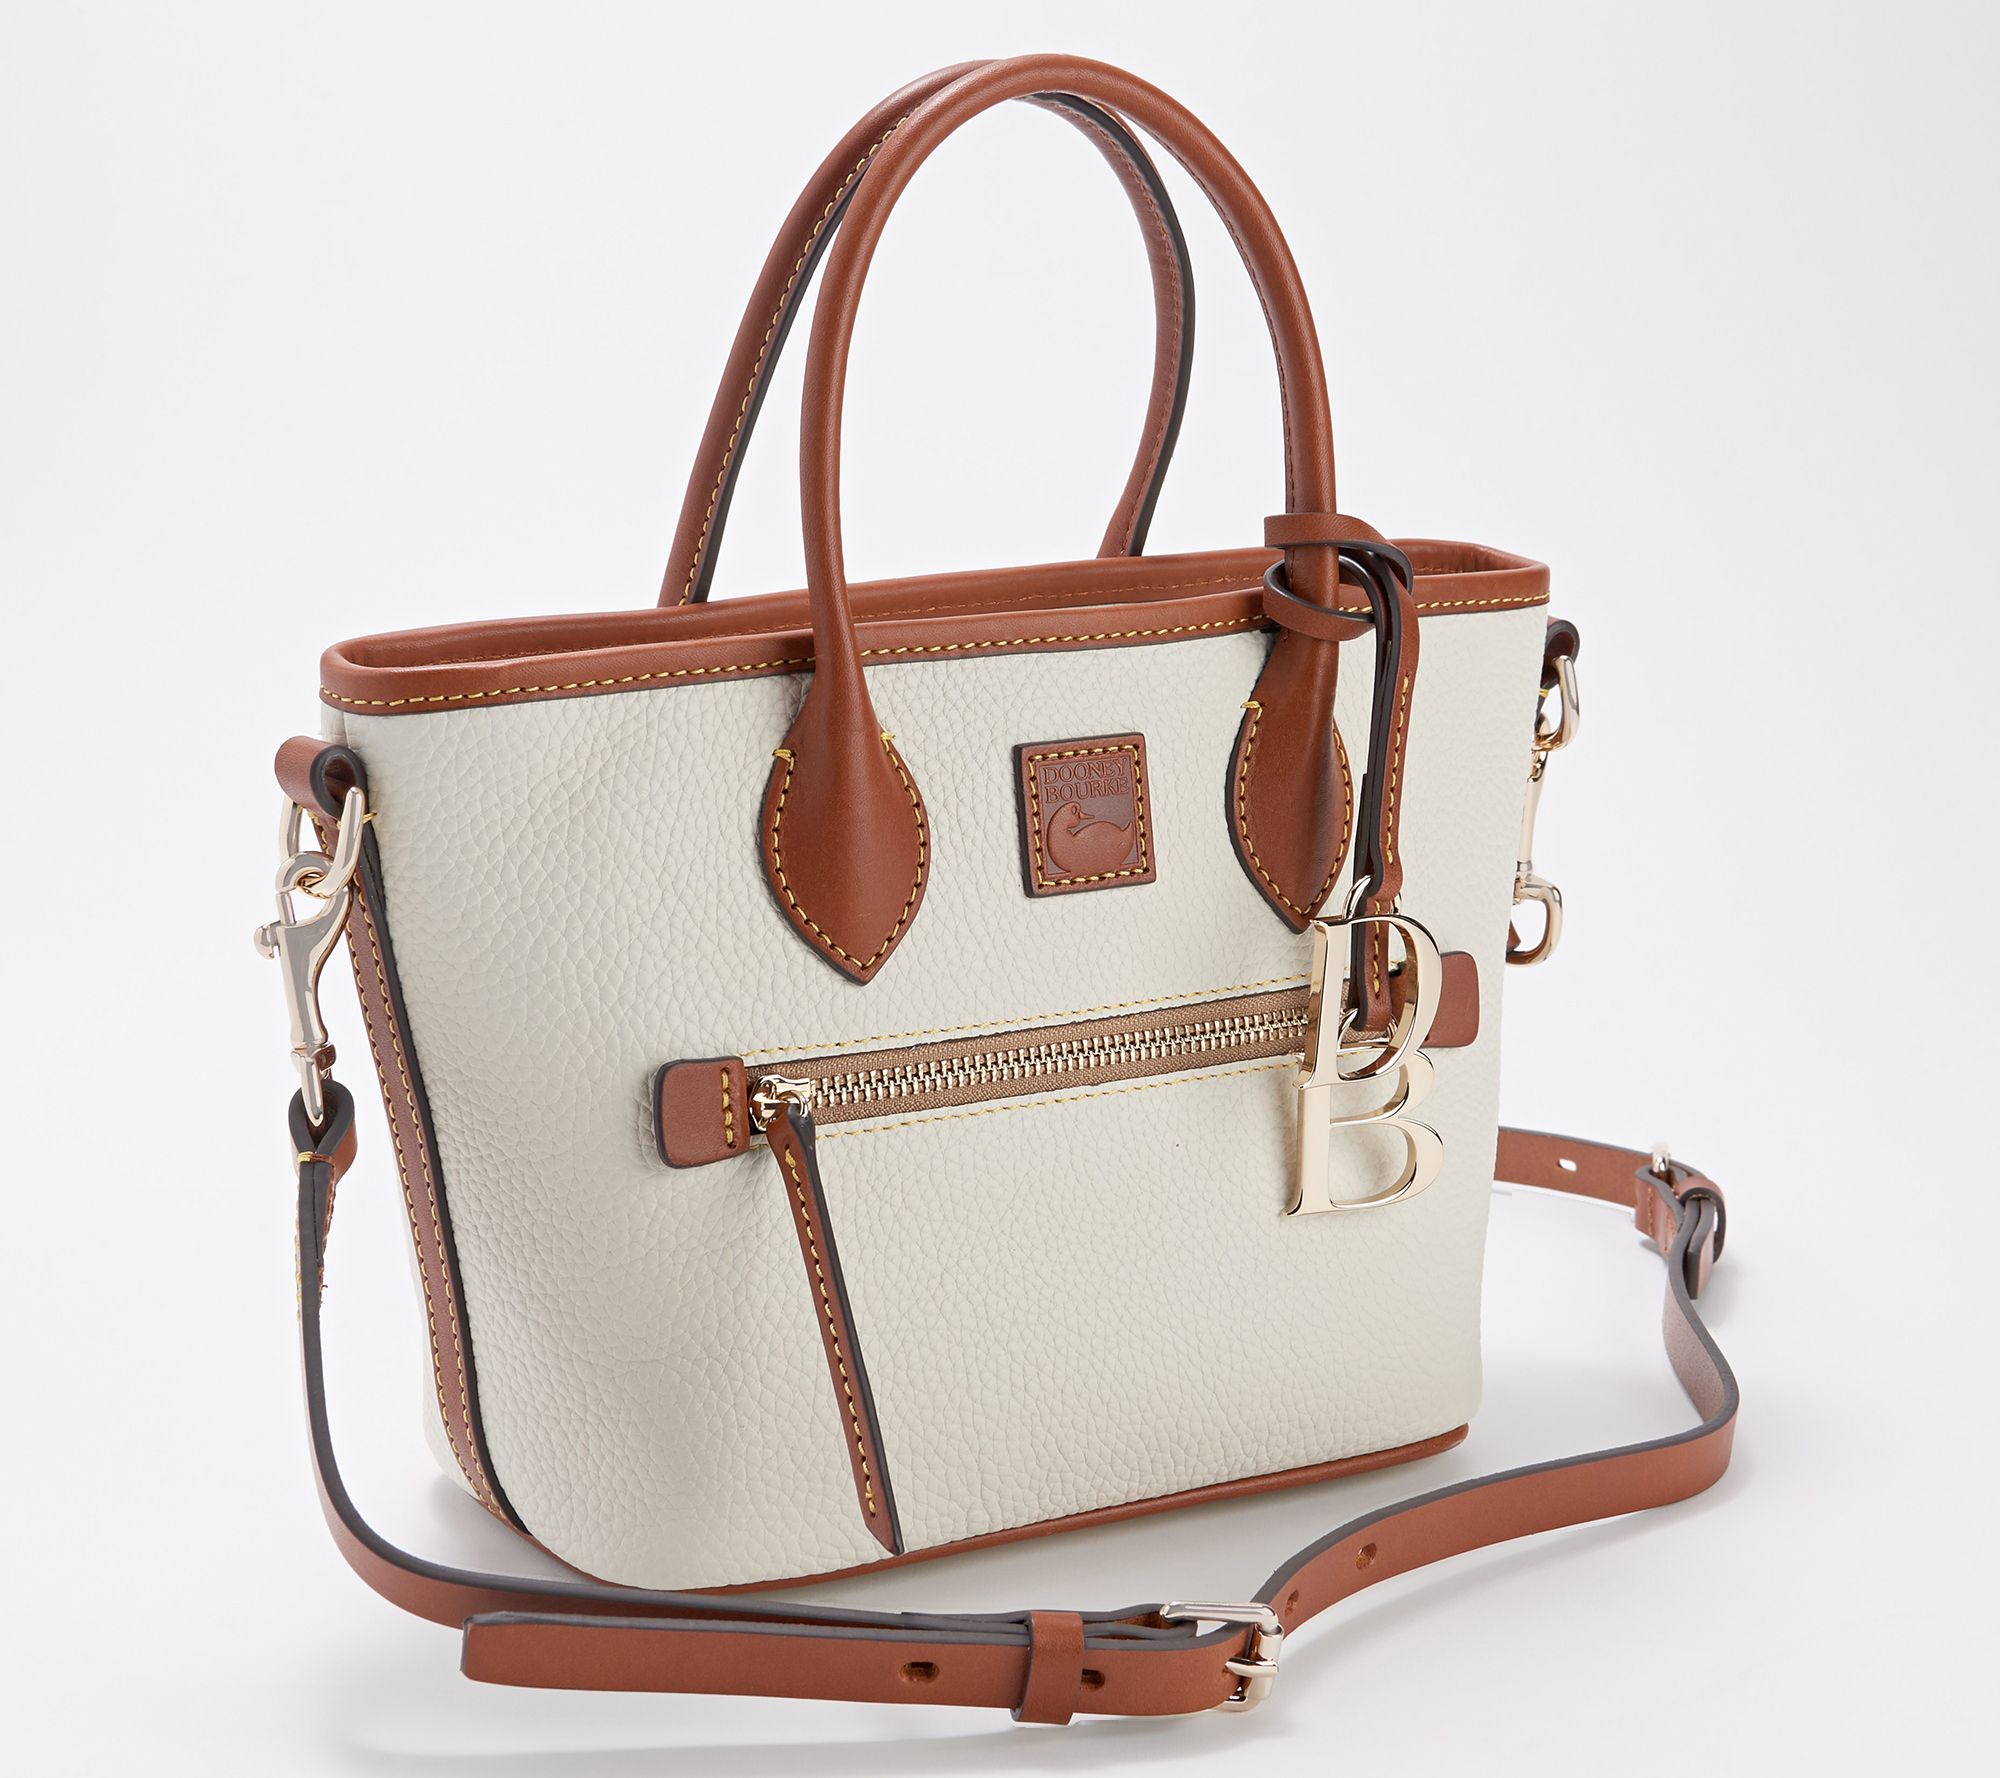 Outlet Express - New! Dooney & Bourke Pebble Leather Small